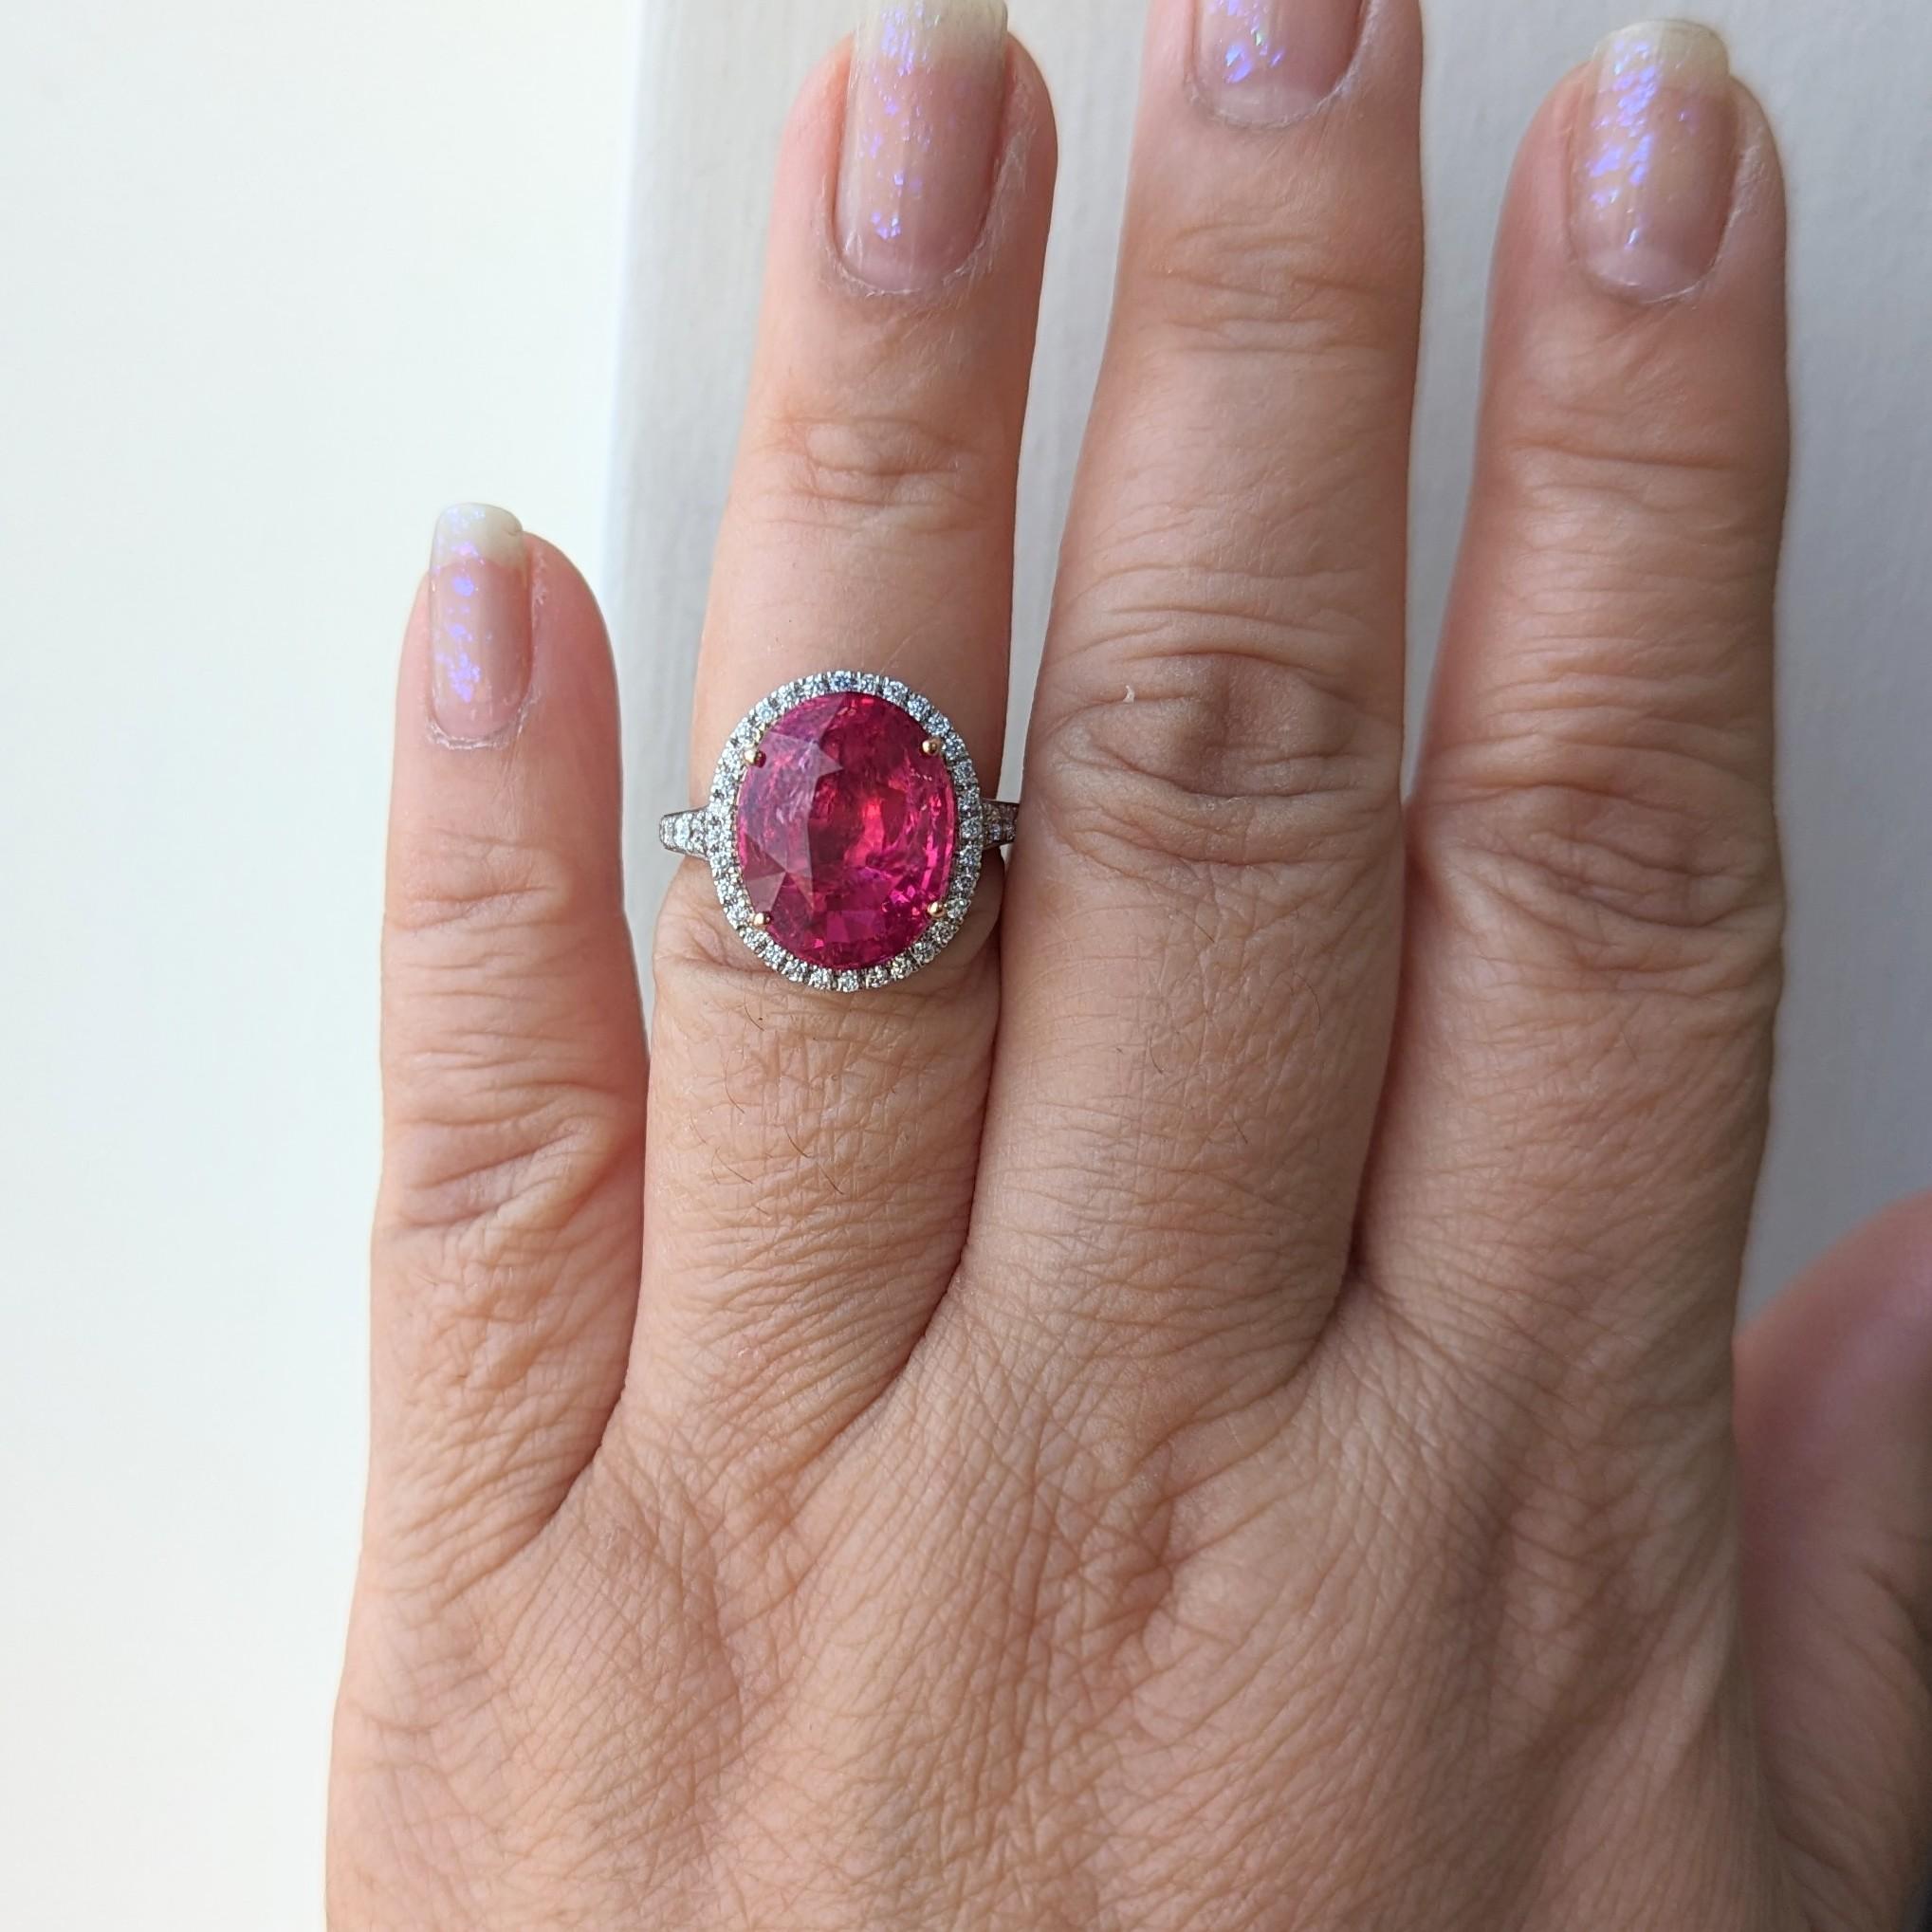 Absolutely gorgeous 10.04 ct. unheated Tanzanian pinkish red spinel oval with good quality white diamond rounds.  Handmade in platinum and 18k rose gold.  Ring size 6.75.  GRS certificate included.